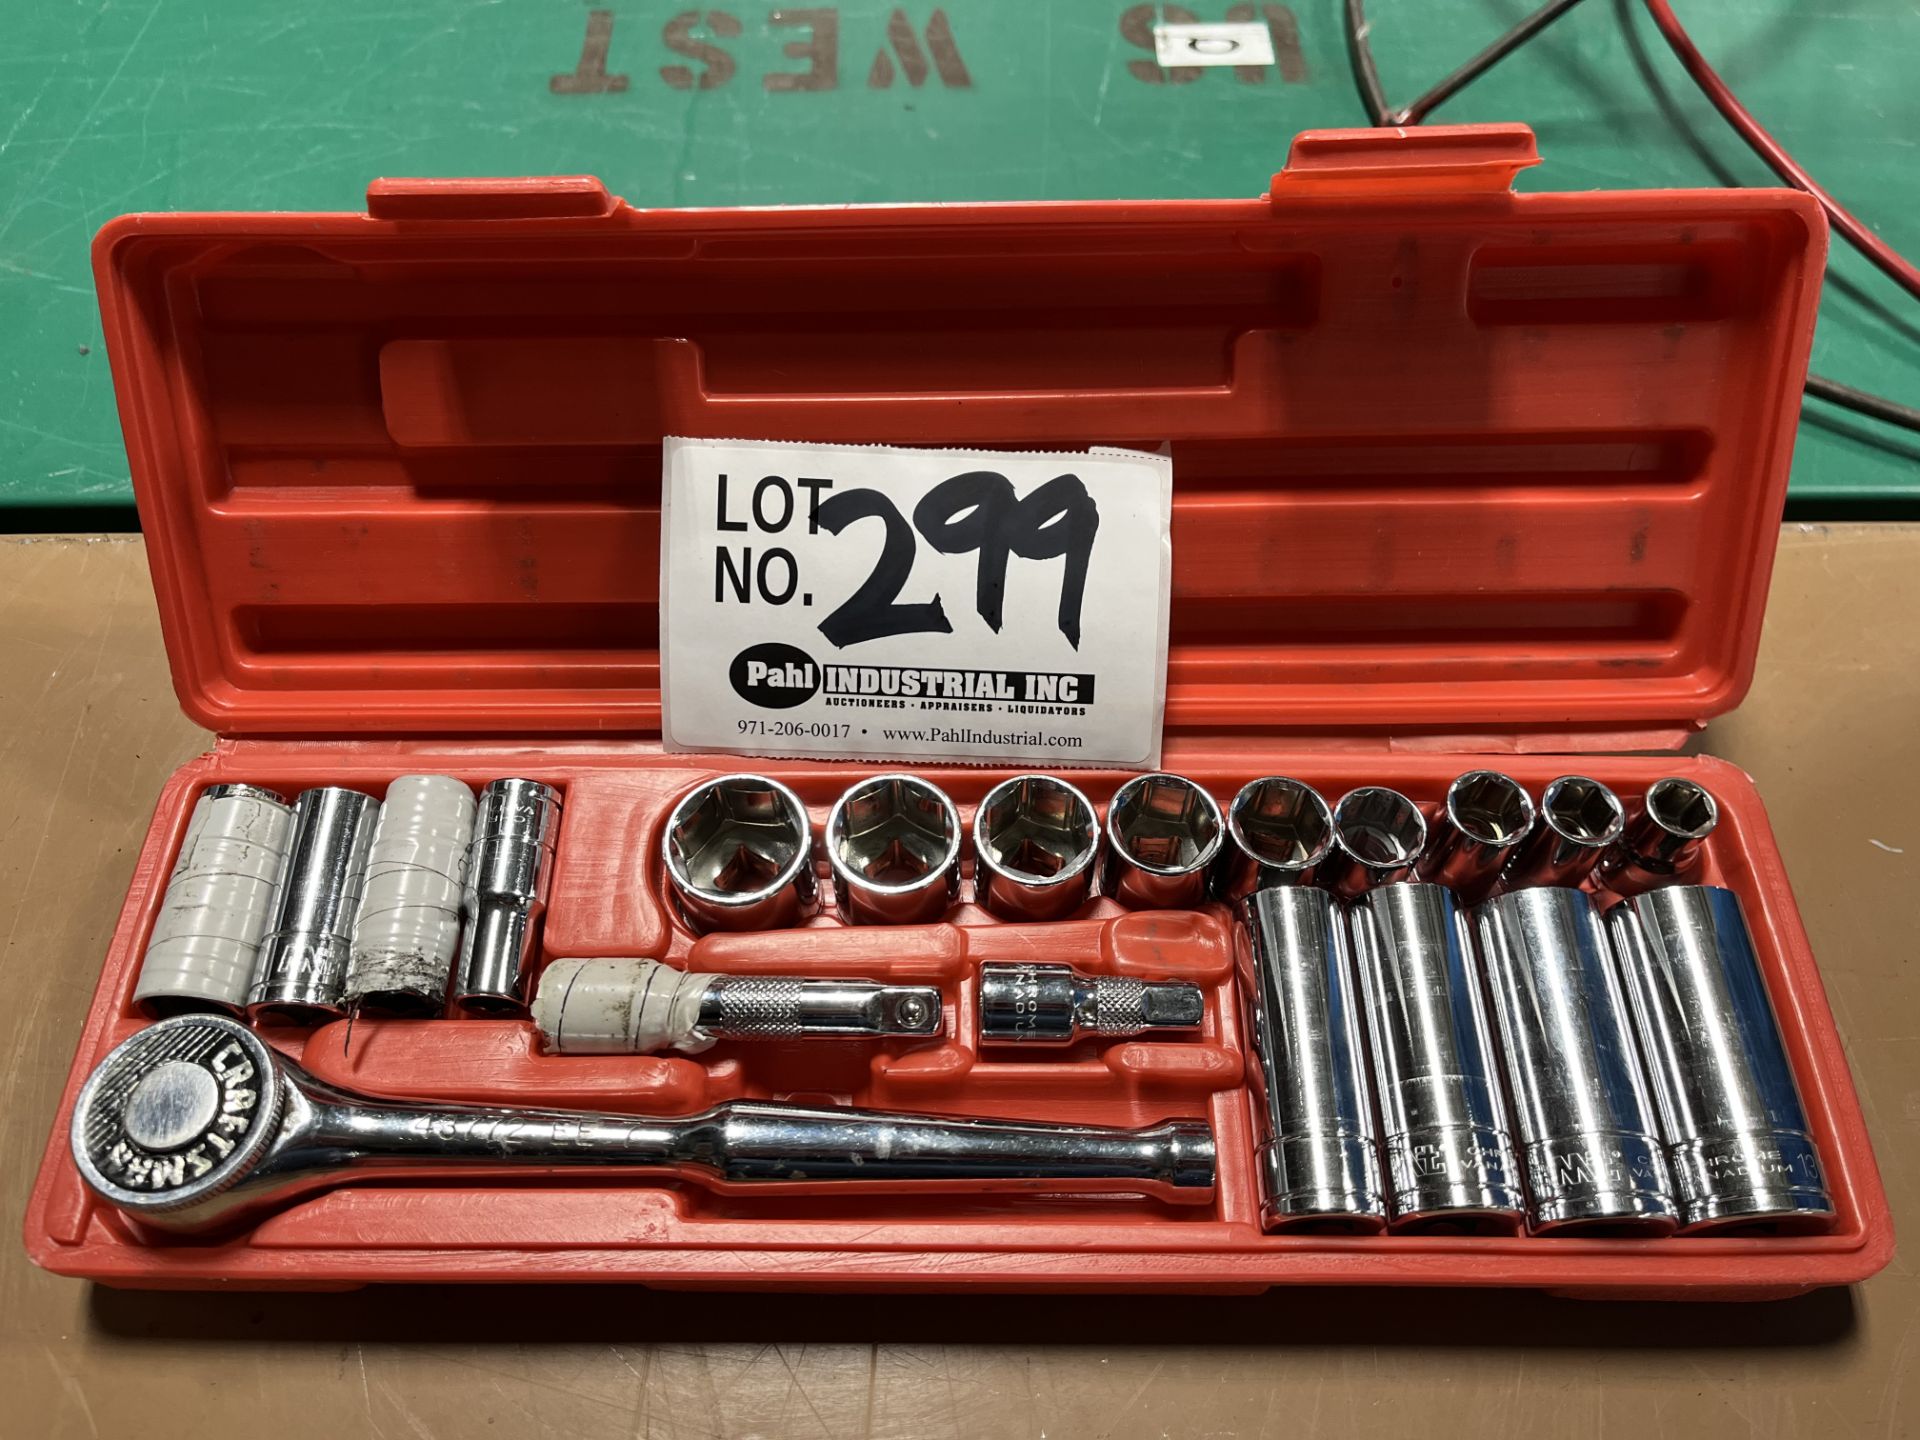 Complete 3/8" - 7/8" Socket Set with extension adapters